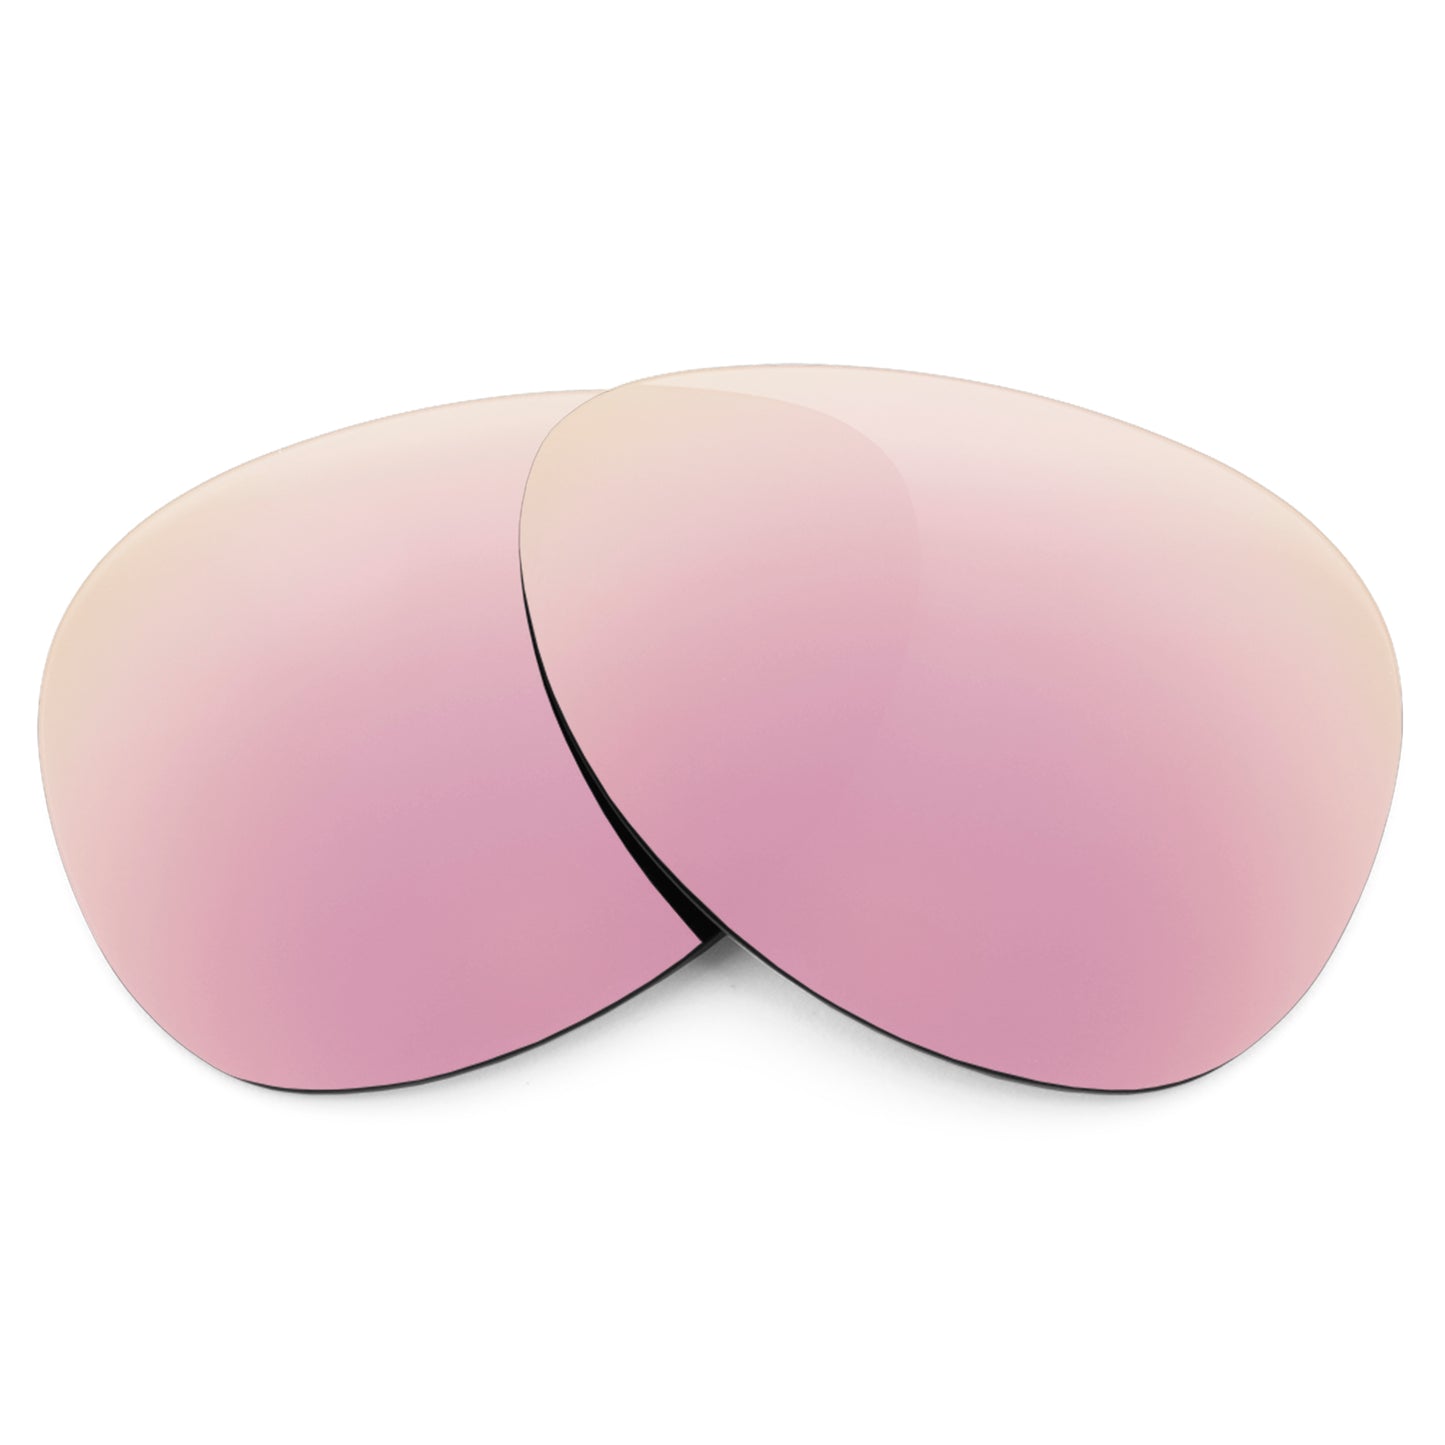 Revant replacement lenses for Ray-Ban Aviator RB3025 62mm Non-Polarized Rose Gold